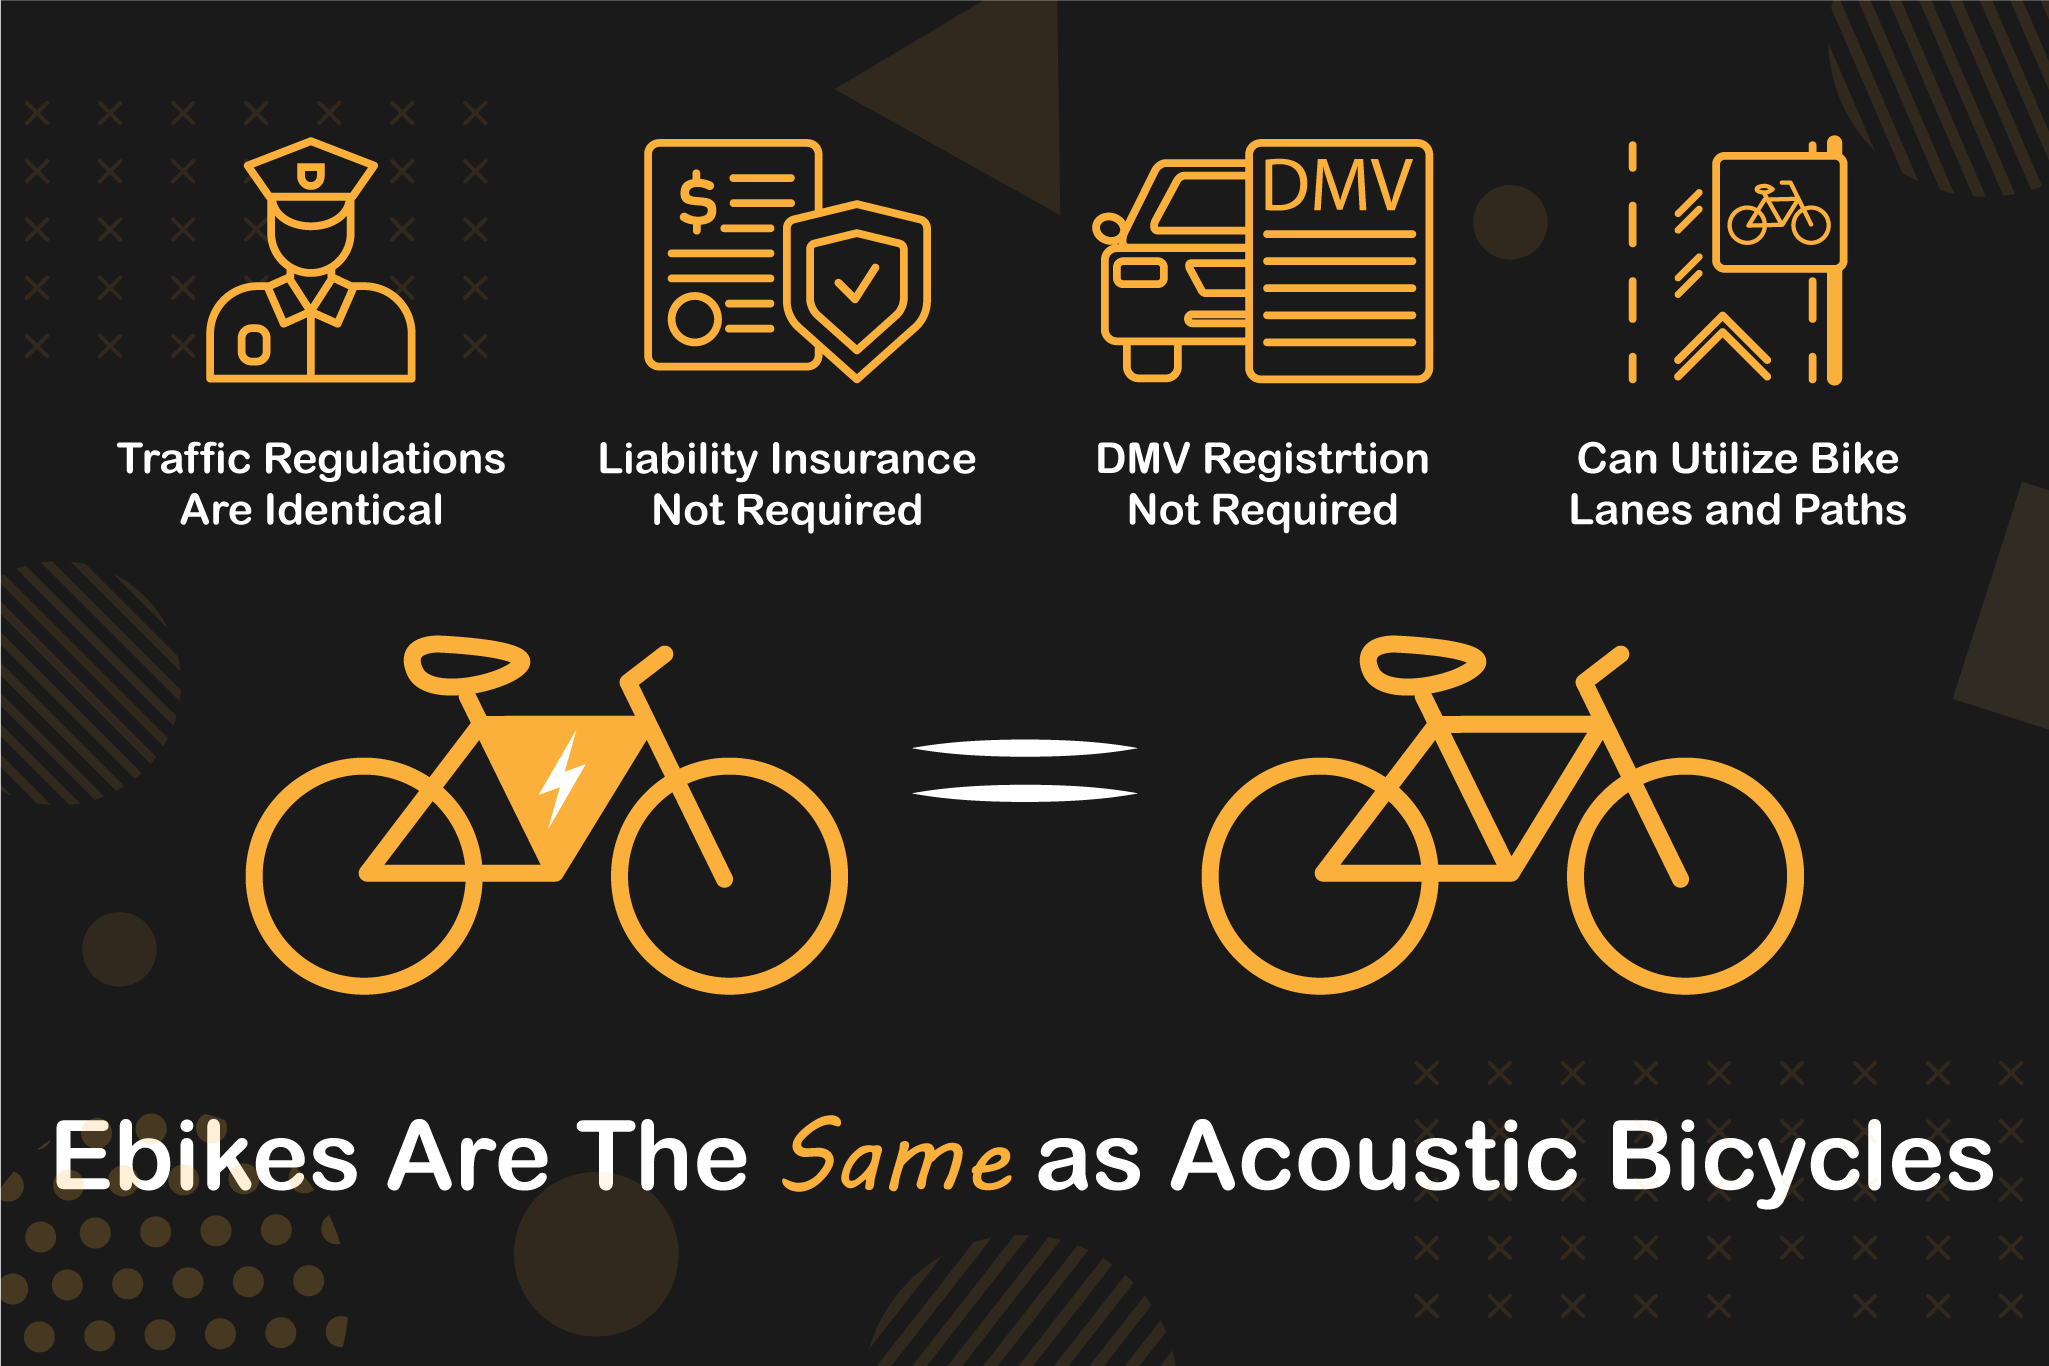 Illustration showing commuting perks of Ebikes are similar to acoustic bicycles